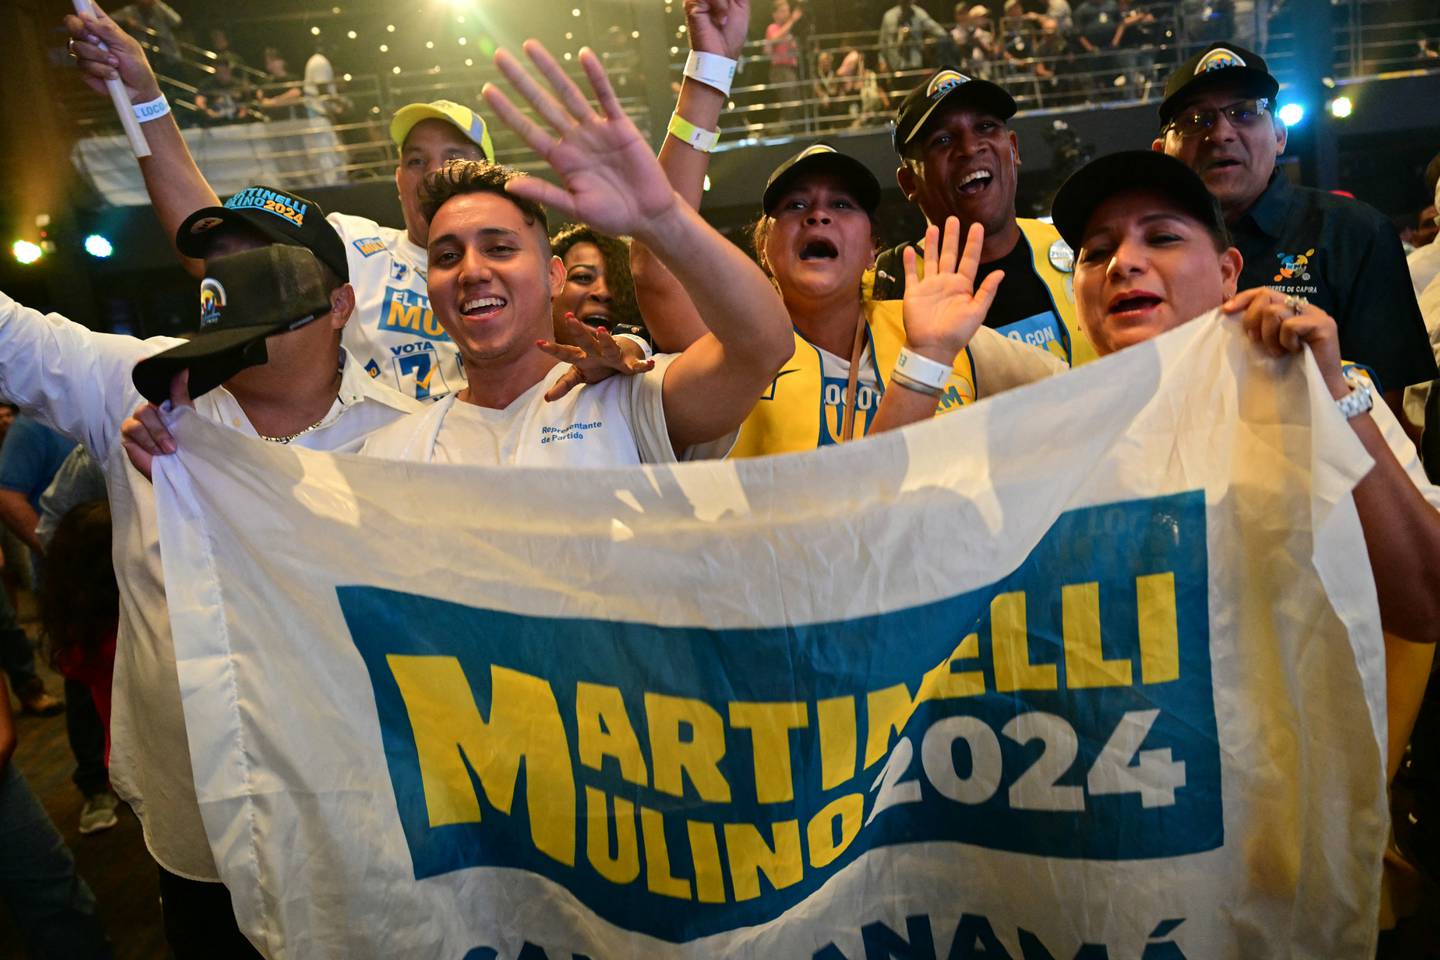 Supporters of Panama's presidential candidate for the Realizando Metas party, Jose Raul Mulino, celebrate the first results of the presidential election at his campaign headquarters in the Sheraton Hotel in Panama City on May 5, 2024. (Photo by MARTIN BERNETTI / AFP)